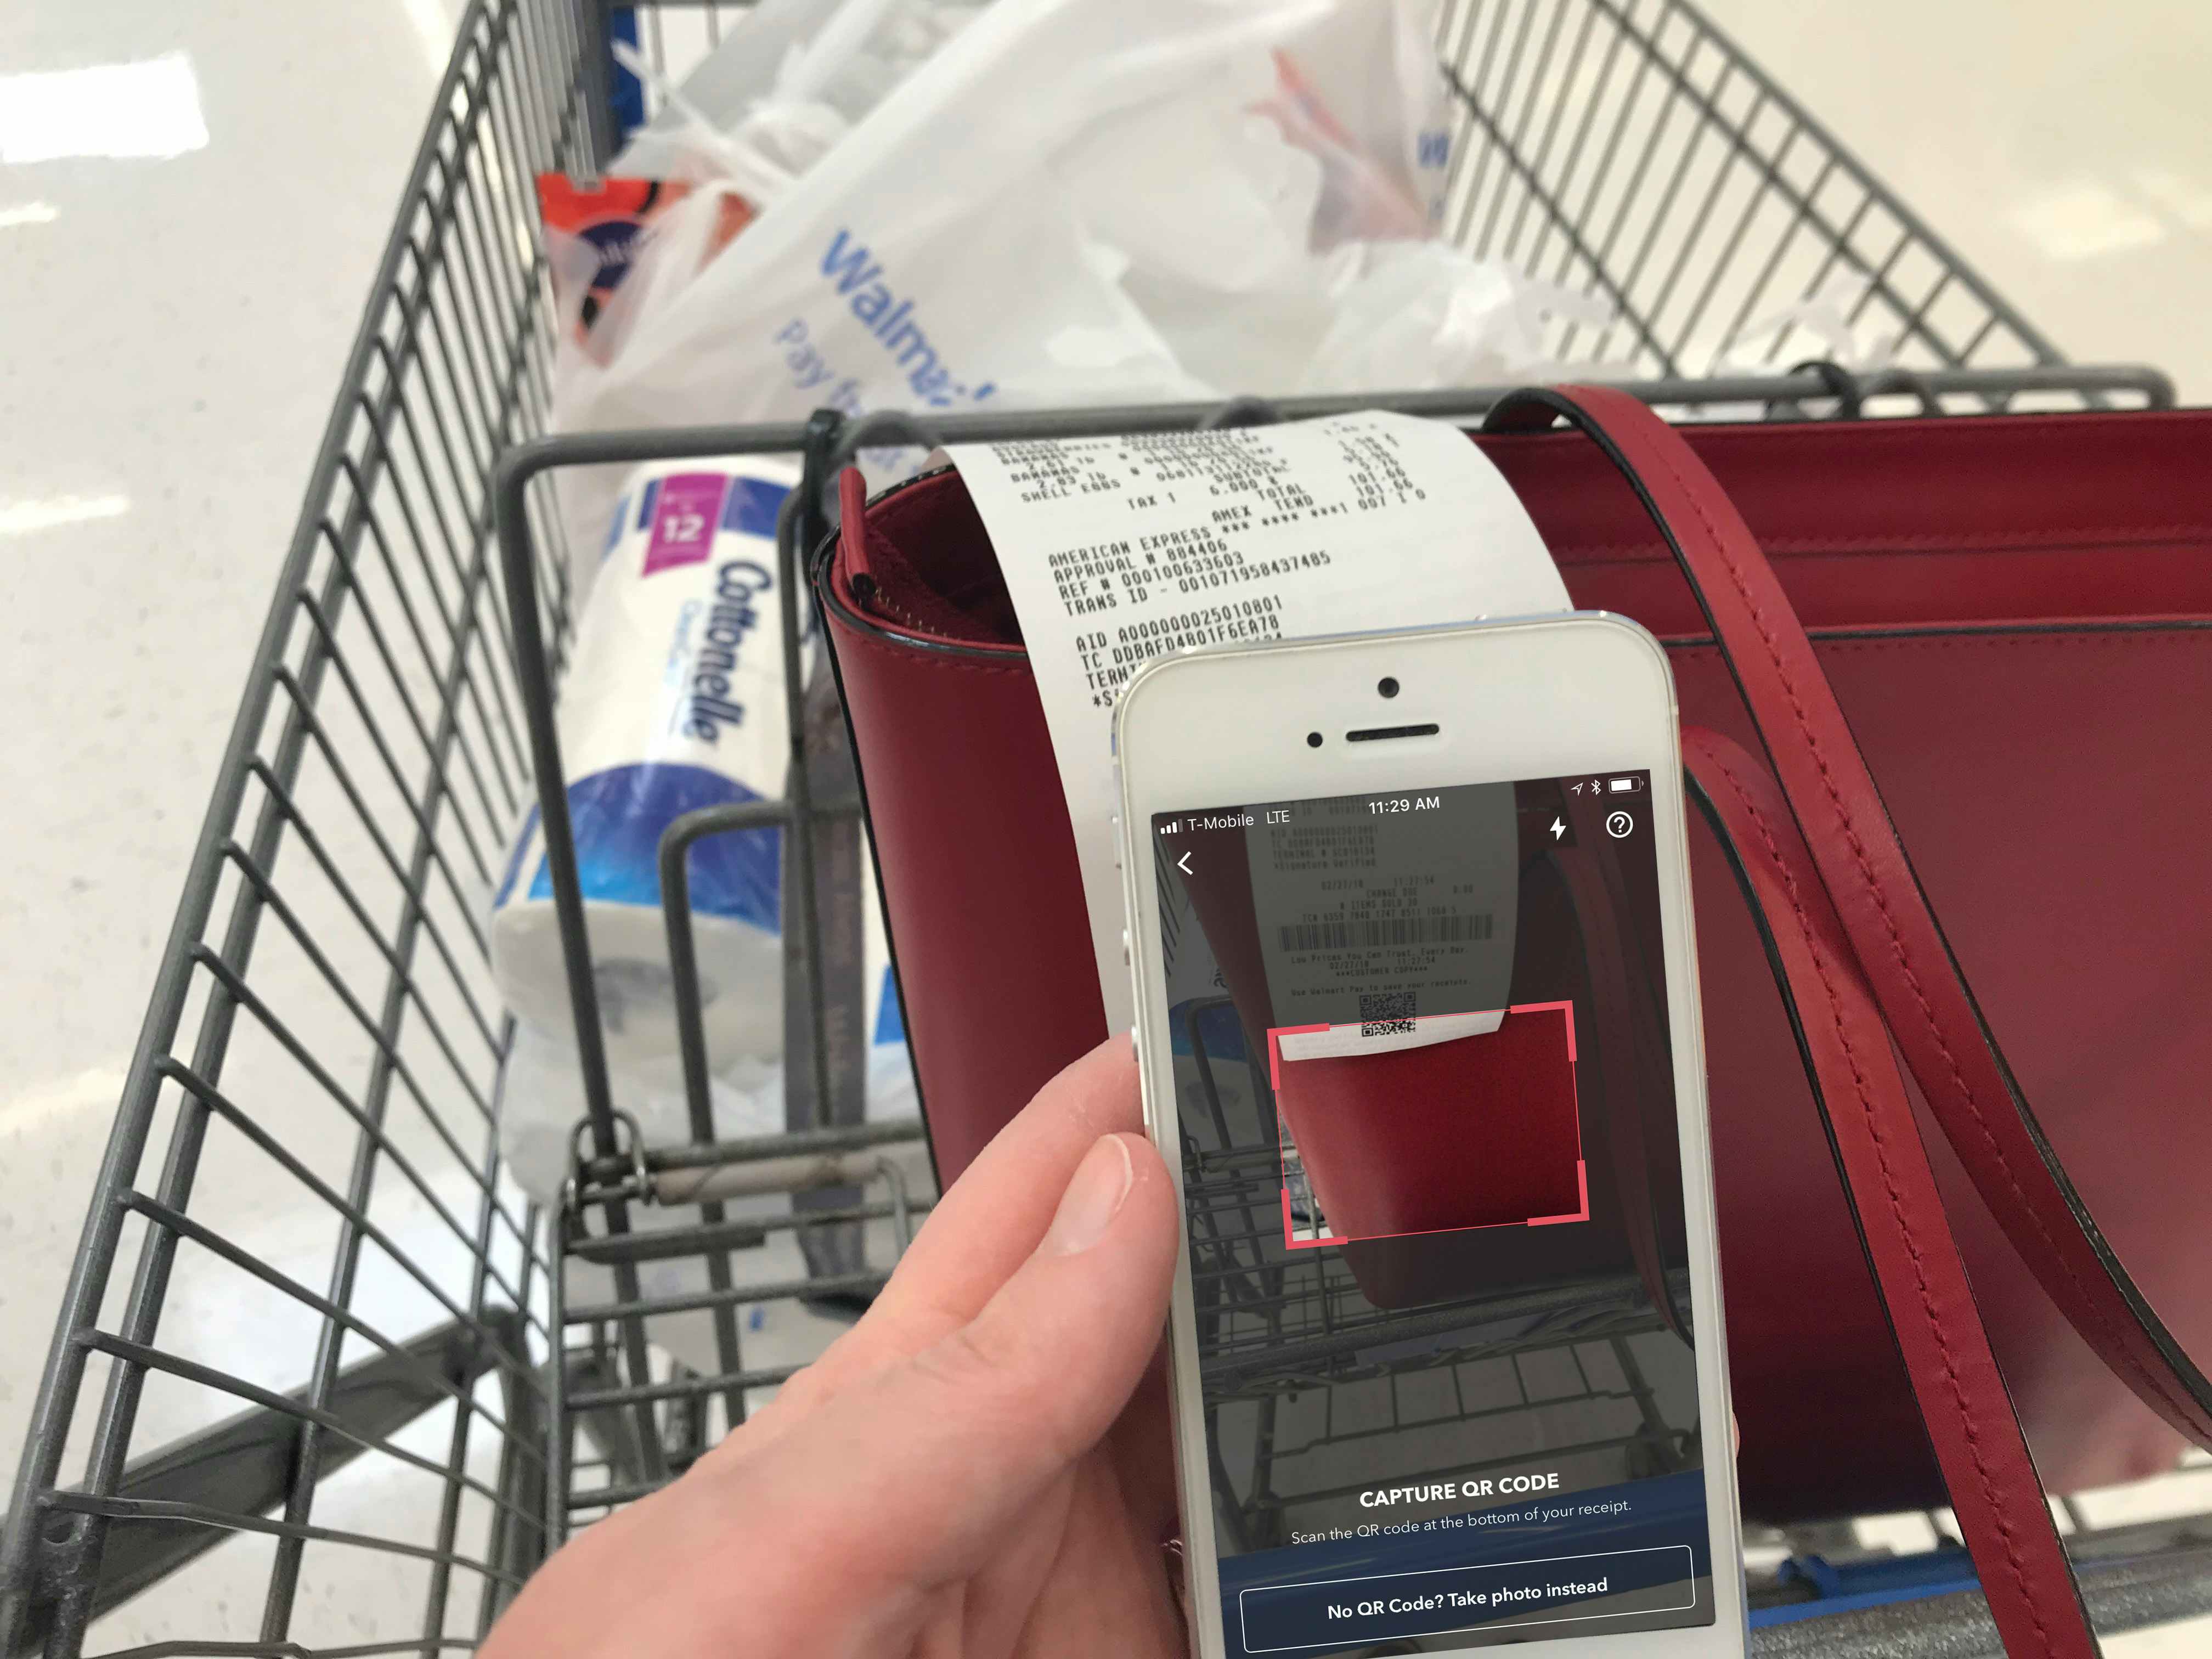 person with cart scanning walmart qr code on receipt for ibotta app